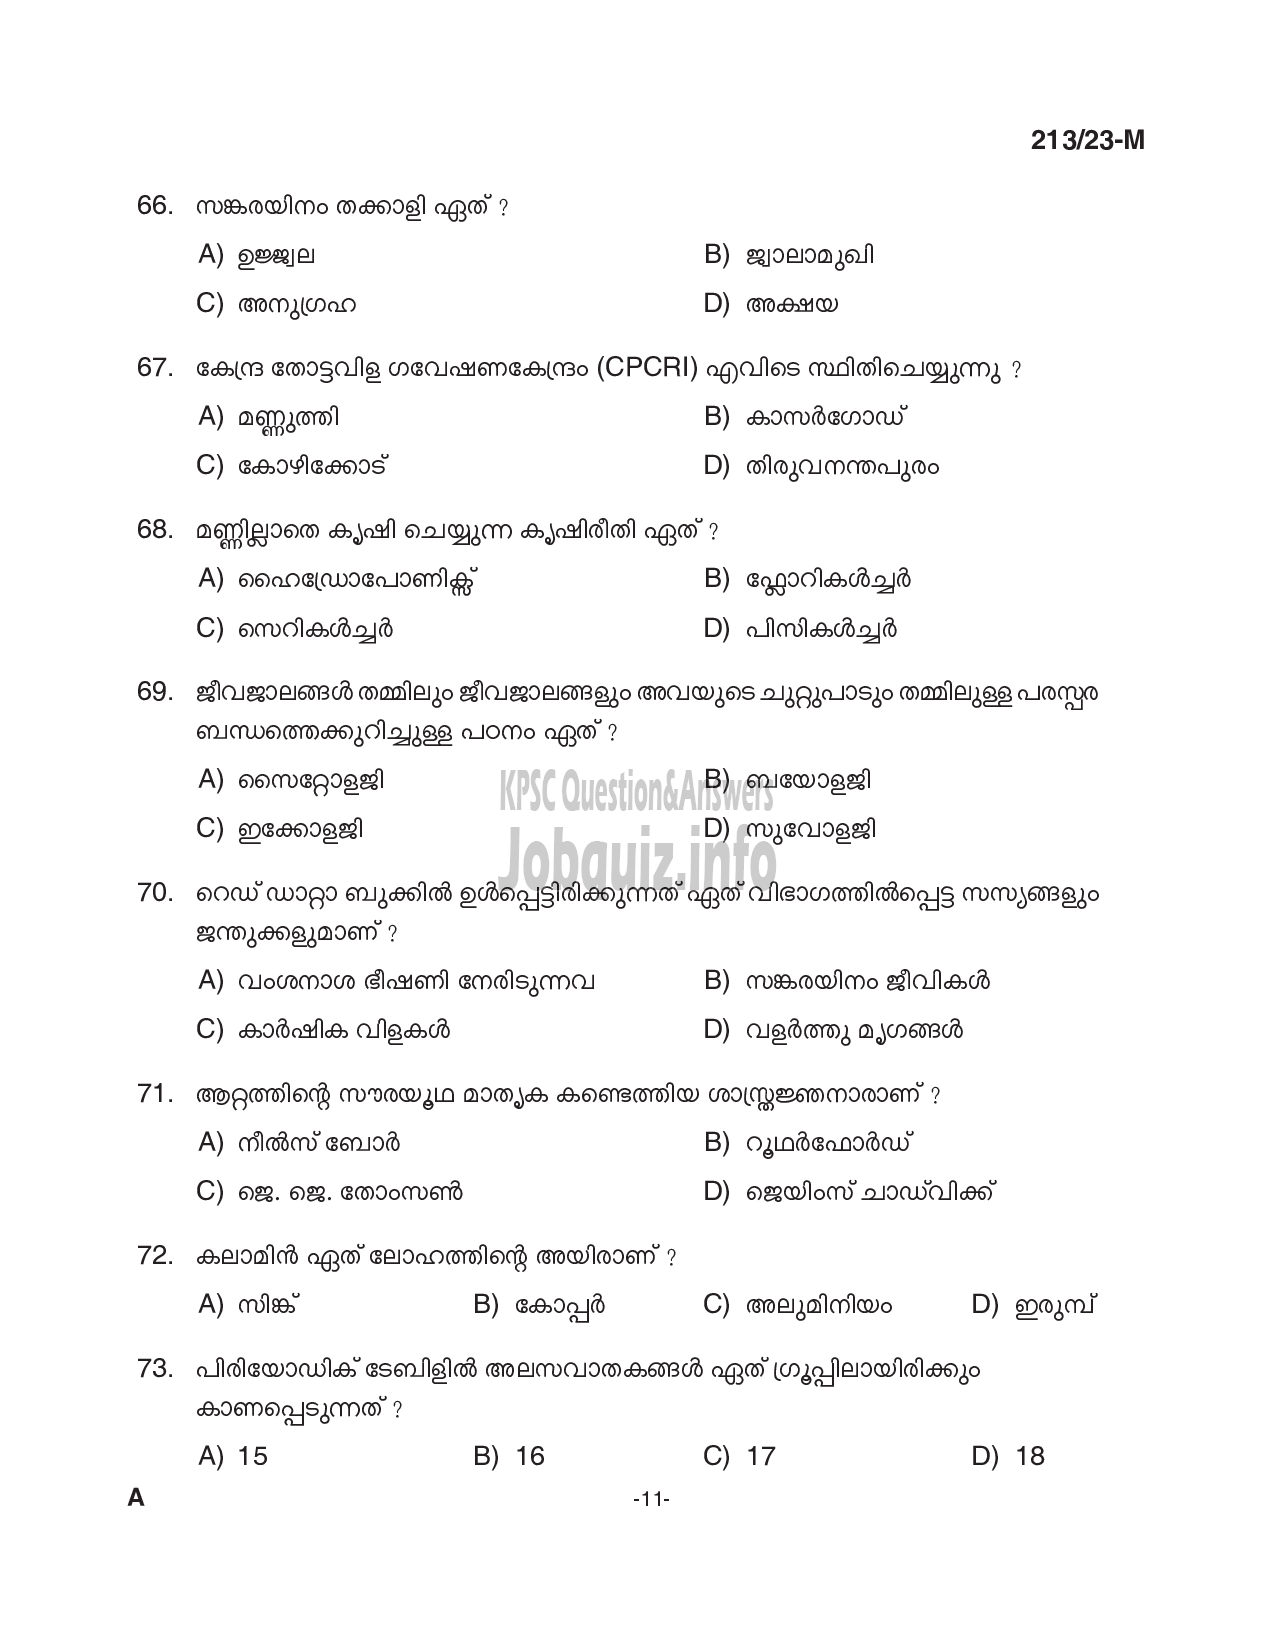 Kerala PSC Question Paper - Cooly Worker, LGS, Office Attendant Gr II/ Messenger/ Night Watchman, Farm Worker, Ambulance Assistant (Preliminary Examination Stage V) -11